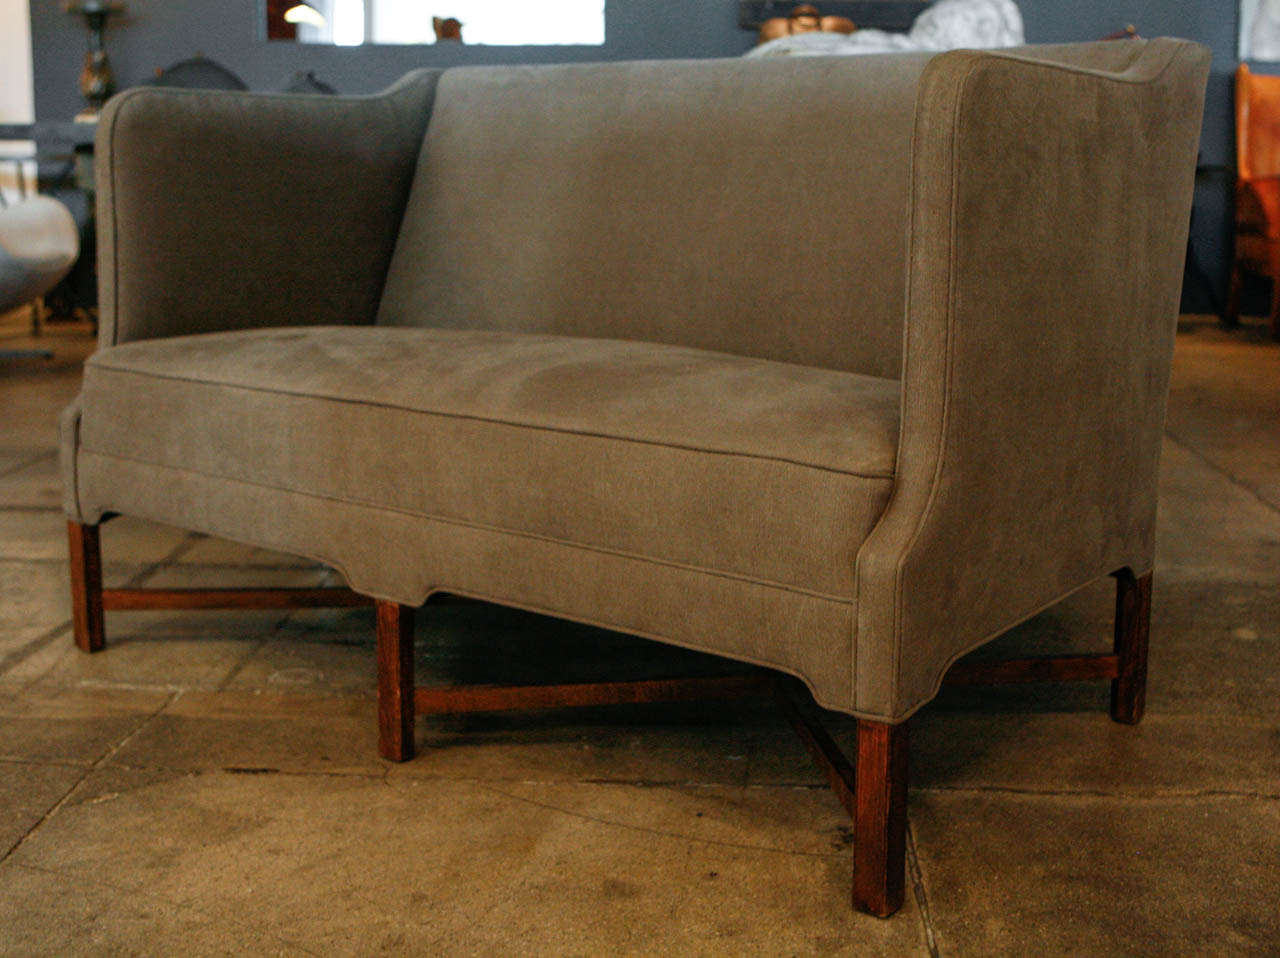 one of our favorites of all designs , kaare klint's 2-seater sofa. newly reupholstered in dark gray de la cuona linen & it's original cuban mahogany
cross frame.